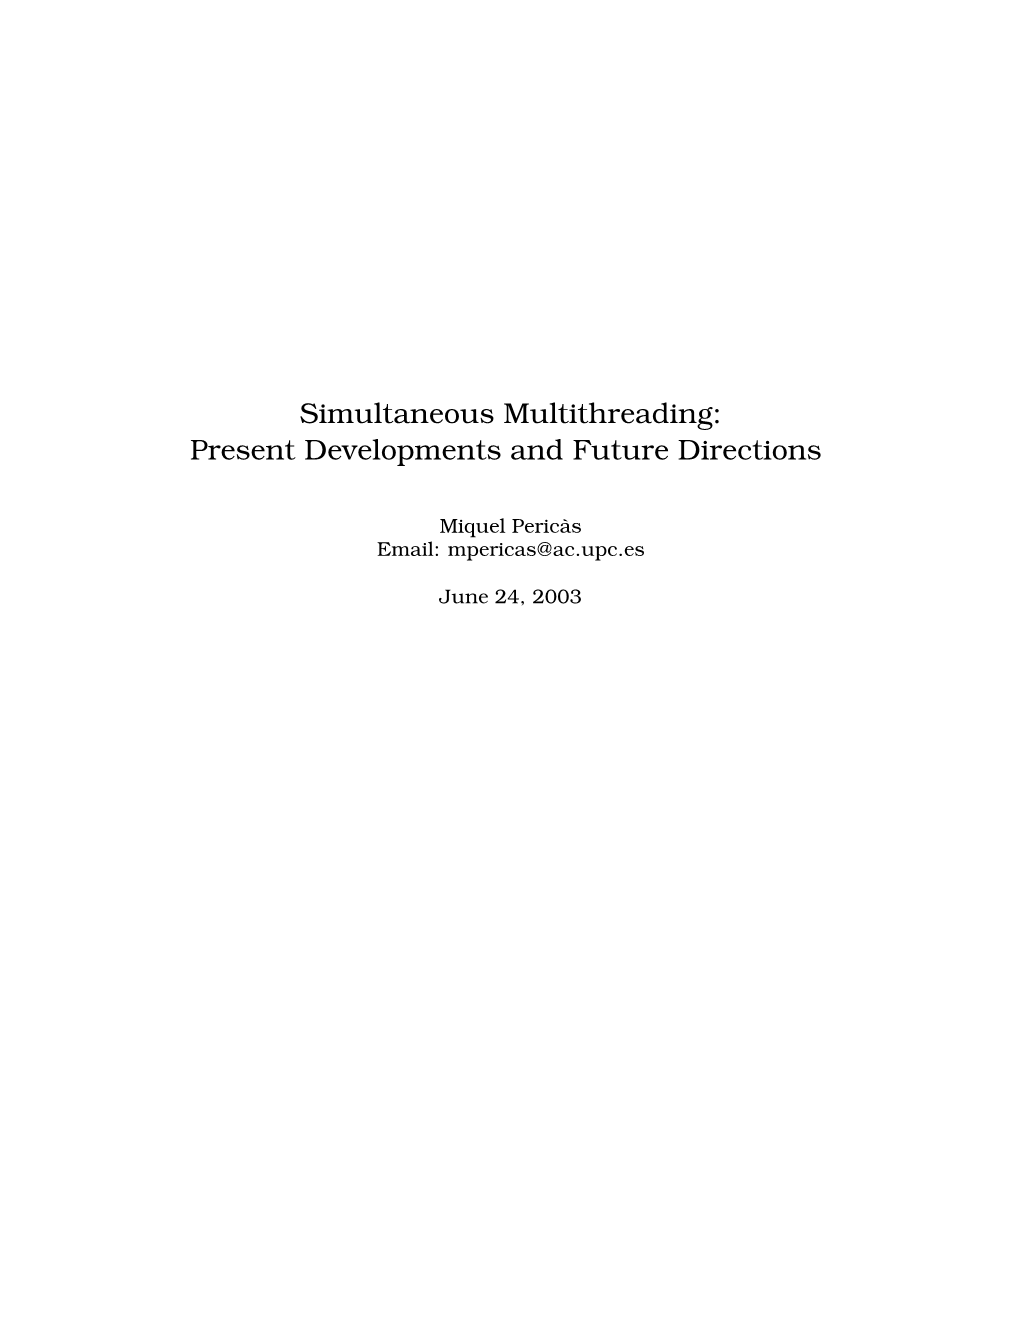 Simultaneous Multithreading: Present Developments and Future Directions